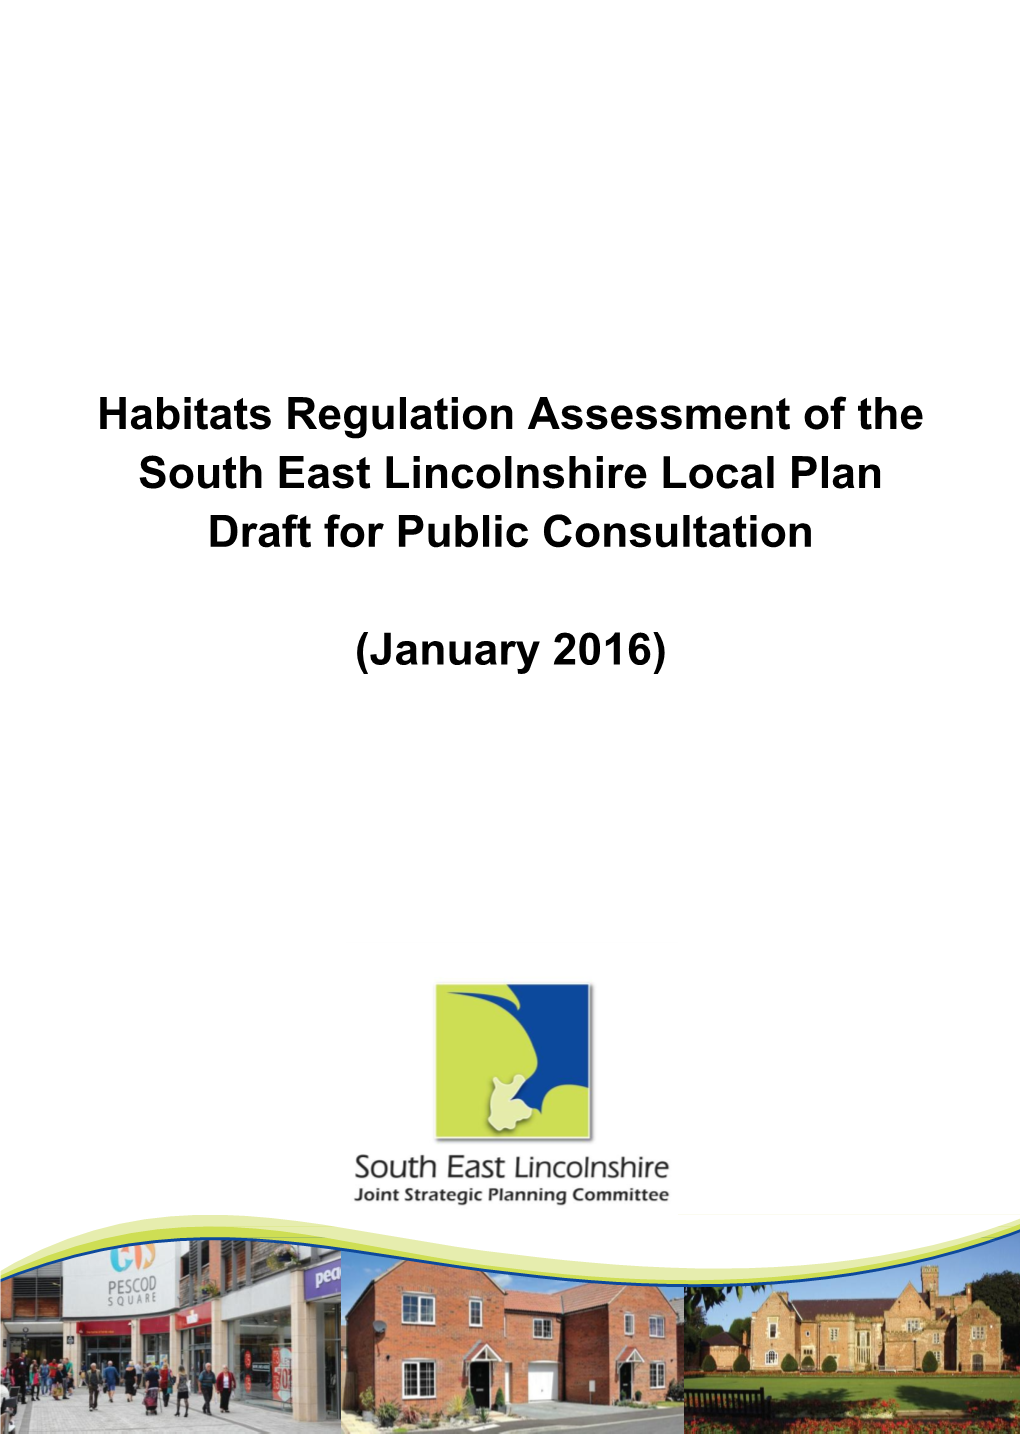 Habitats Regulation Assessment of the South East Lincolnshire Local Plan Draft for Public Consultation